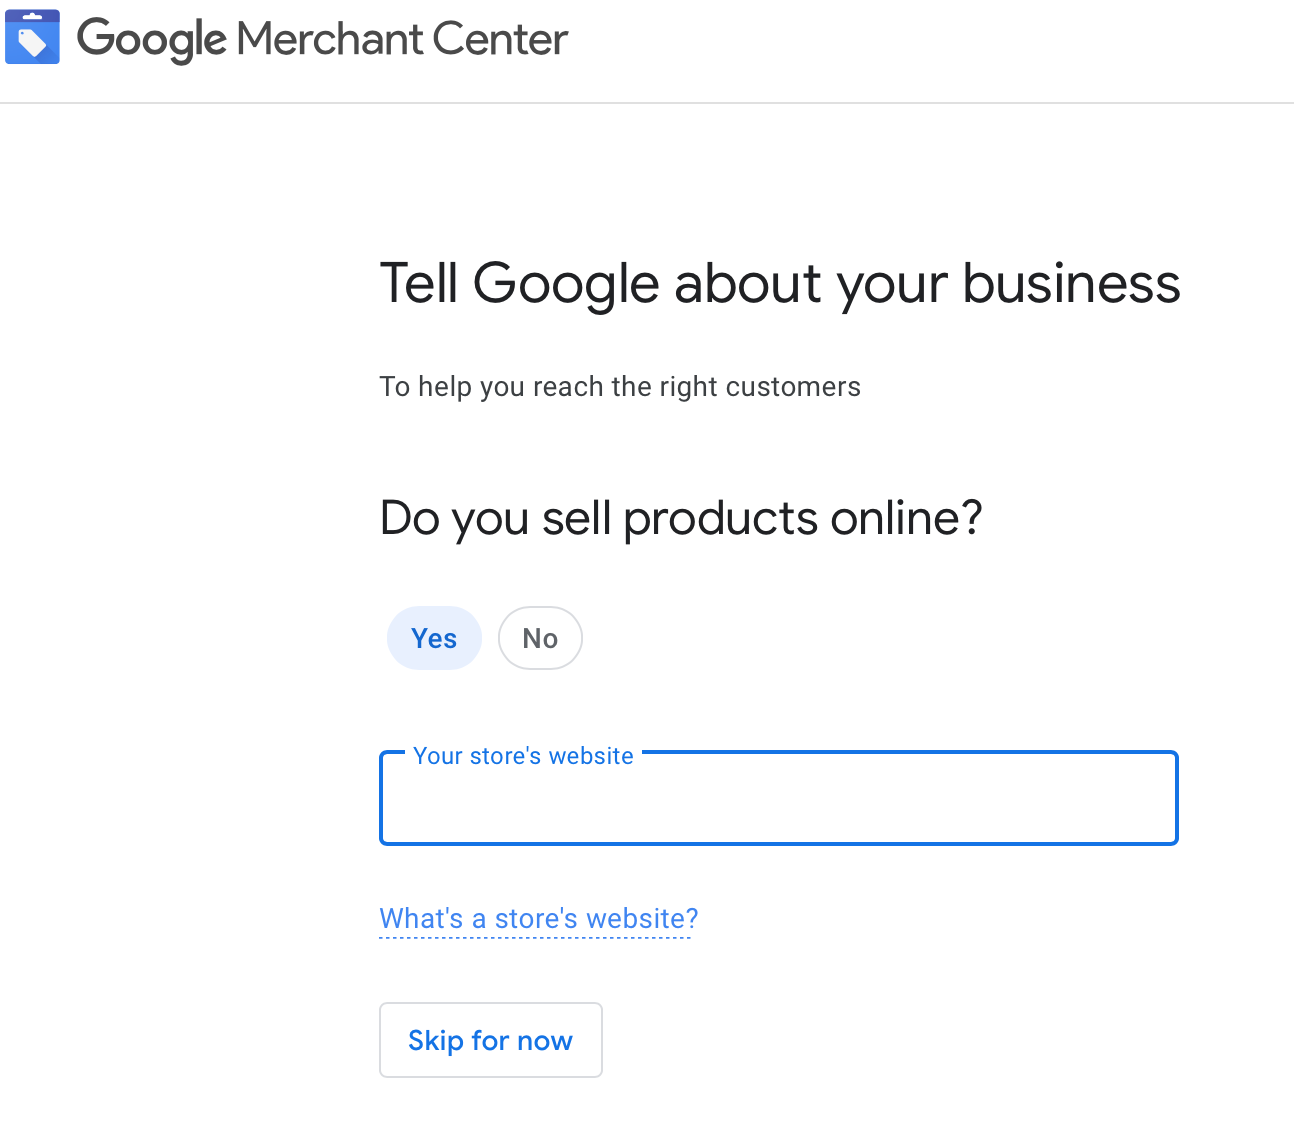 tell Google about your business